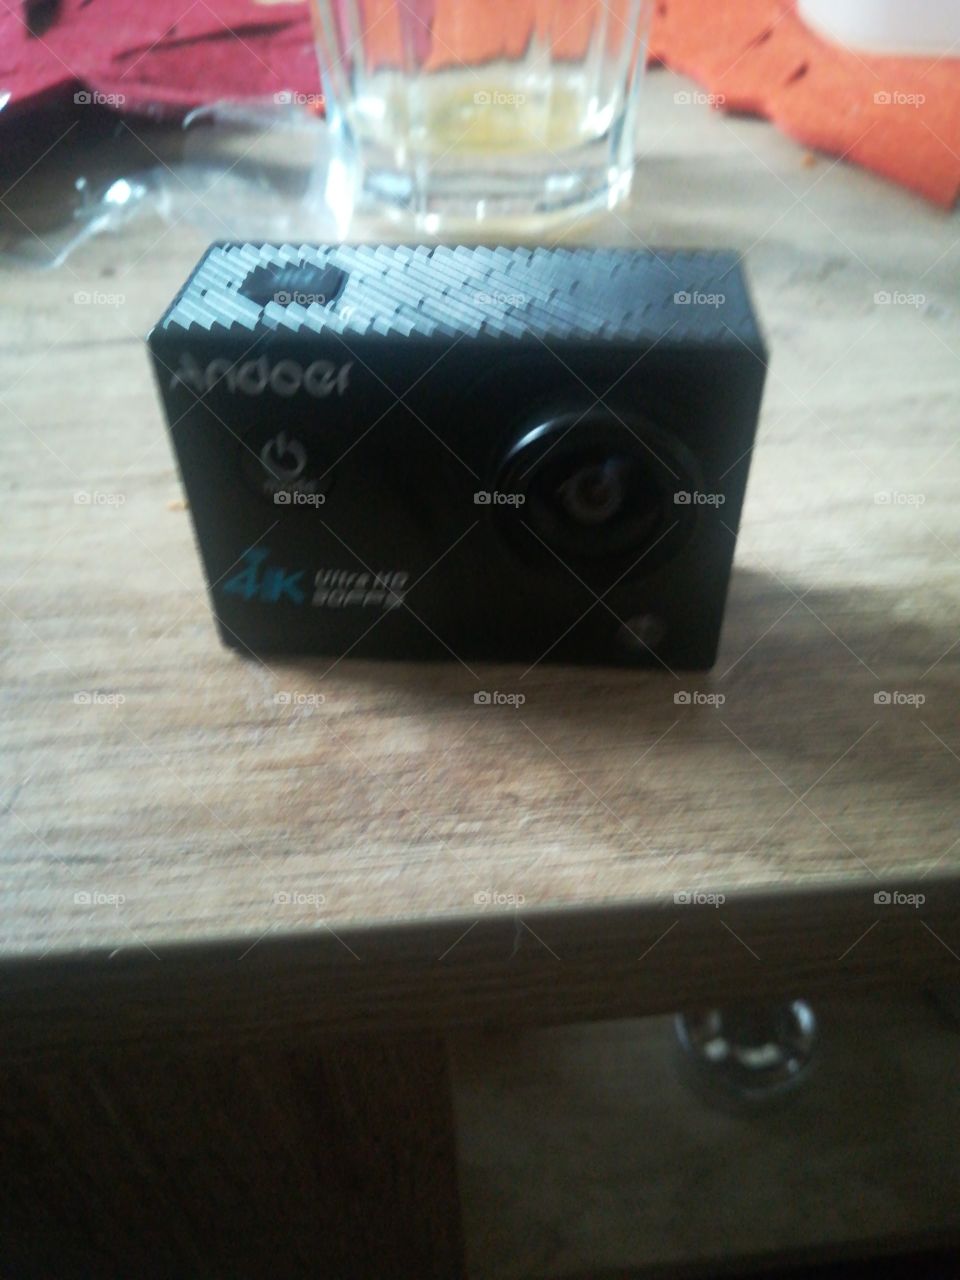 My andoer action cam